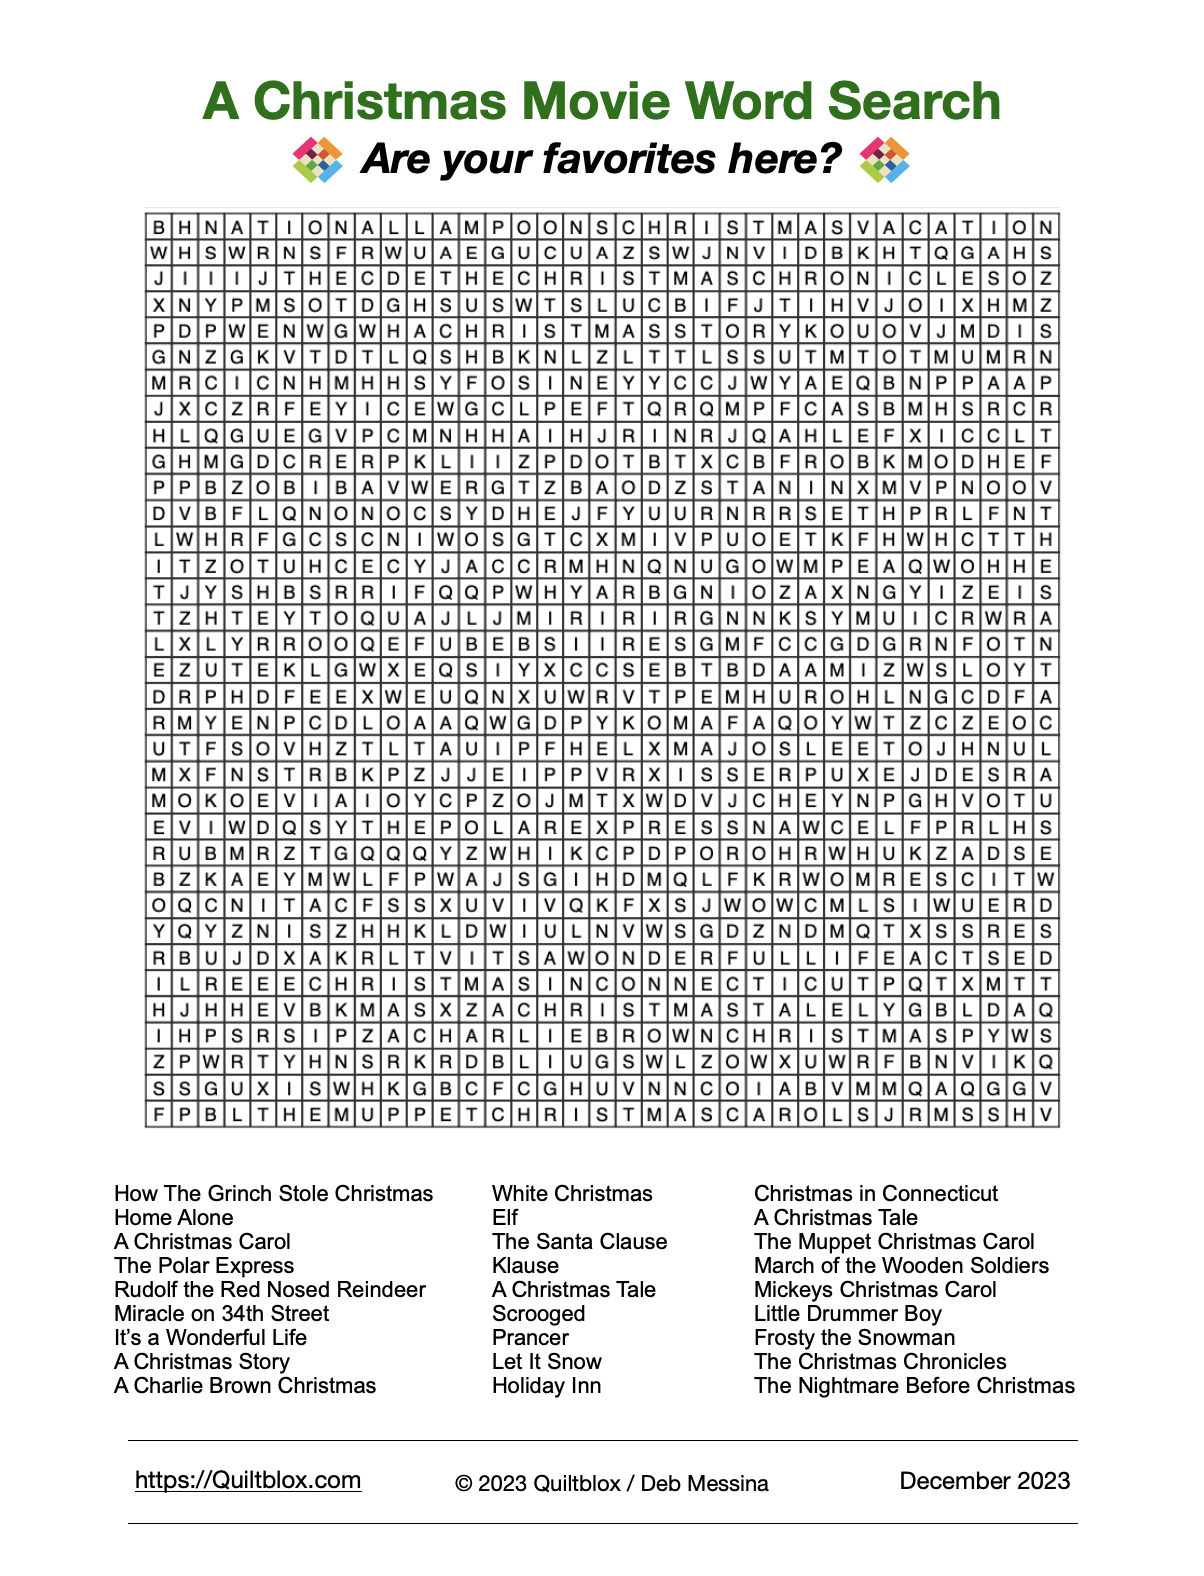 A Christmas Movies Word Search | Quiltblox.com